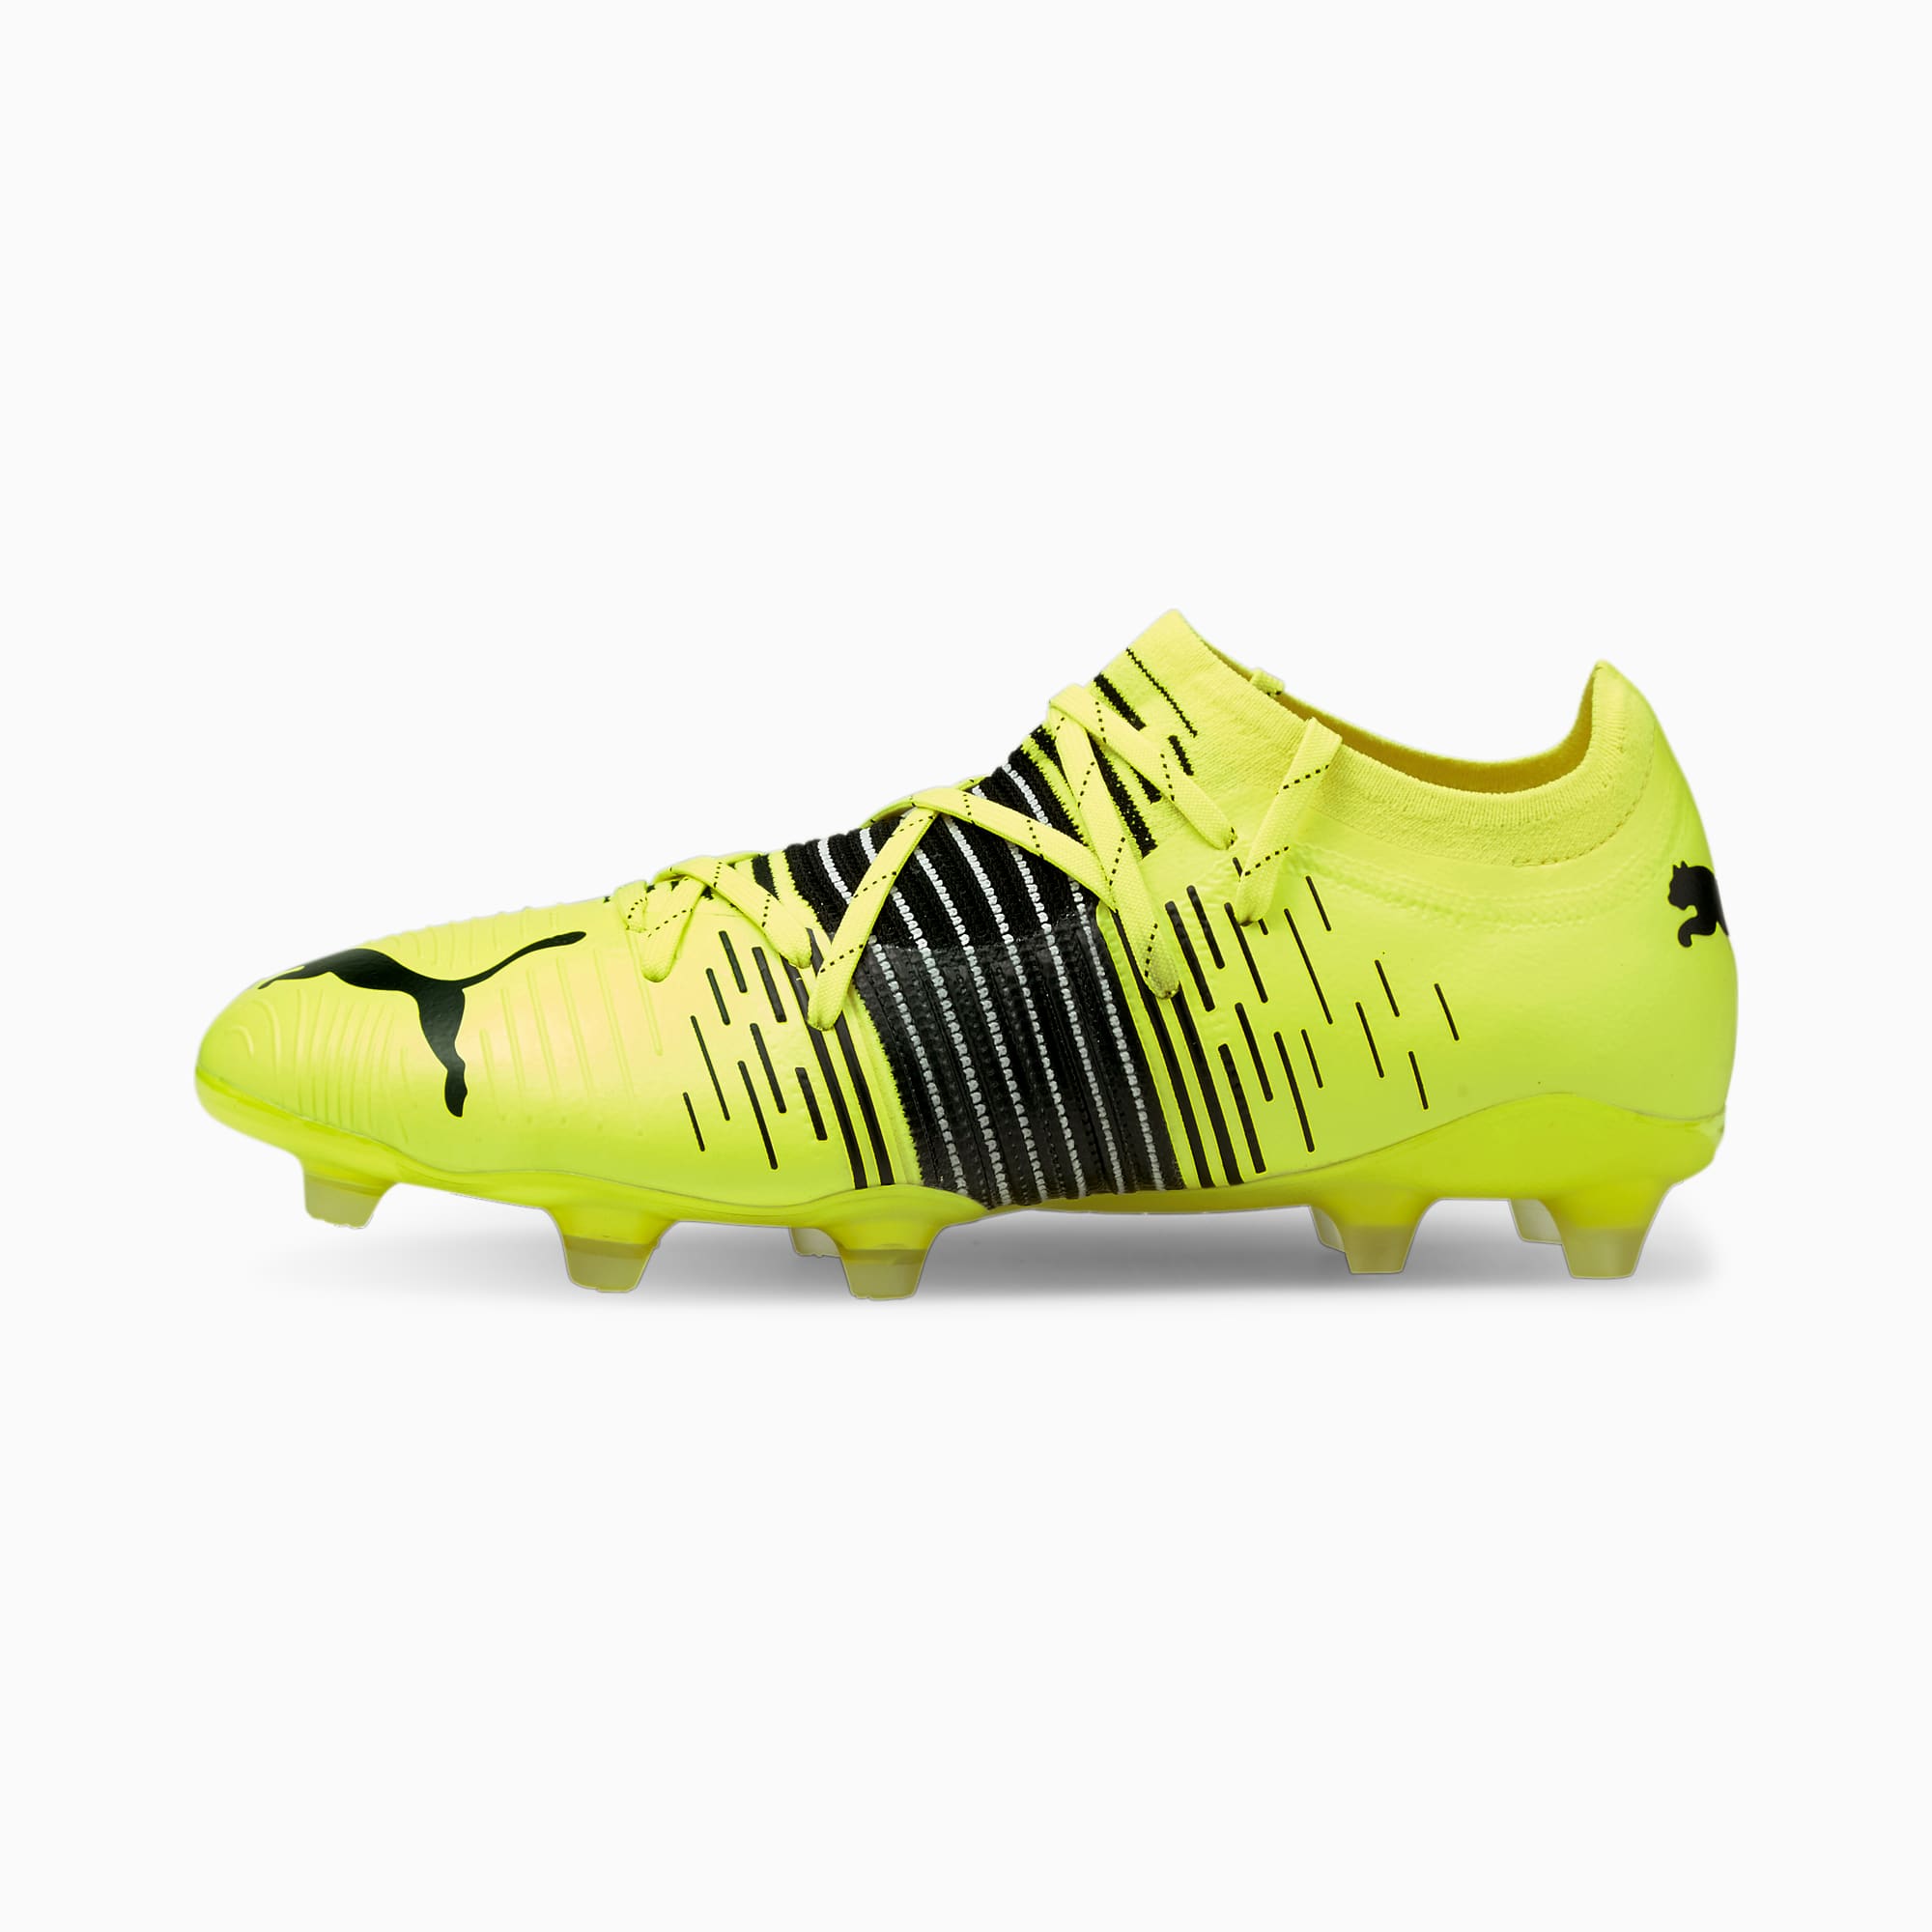 Puma Moulded Boots Clearance 51 Off Powerofdance Com